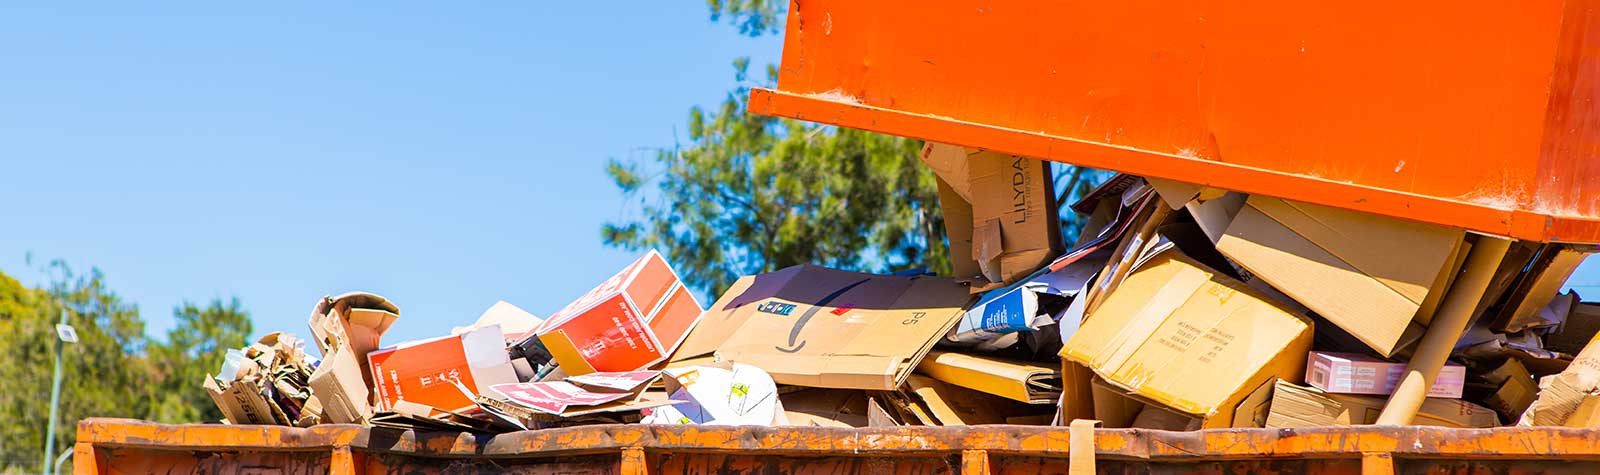 Skip Bin Hire vs Waste & Recycling: What’s best for you?